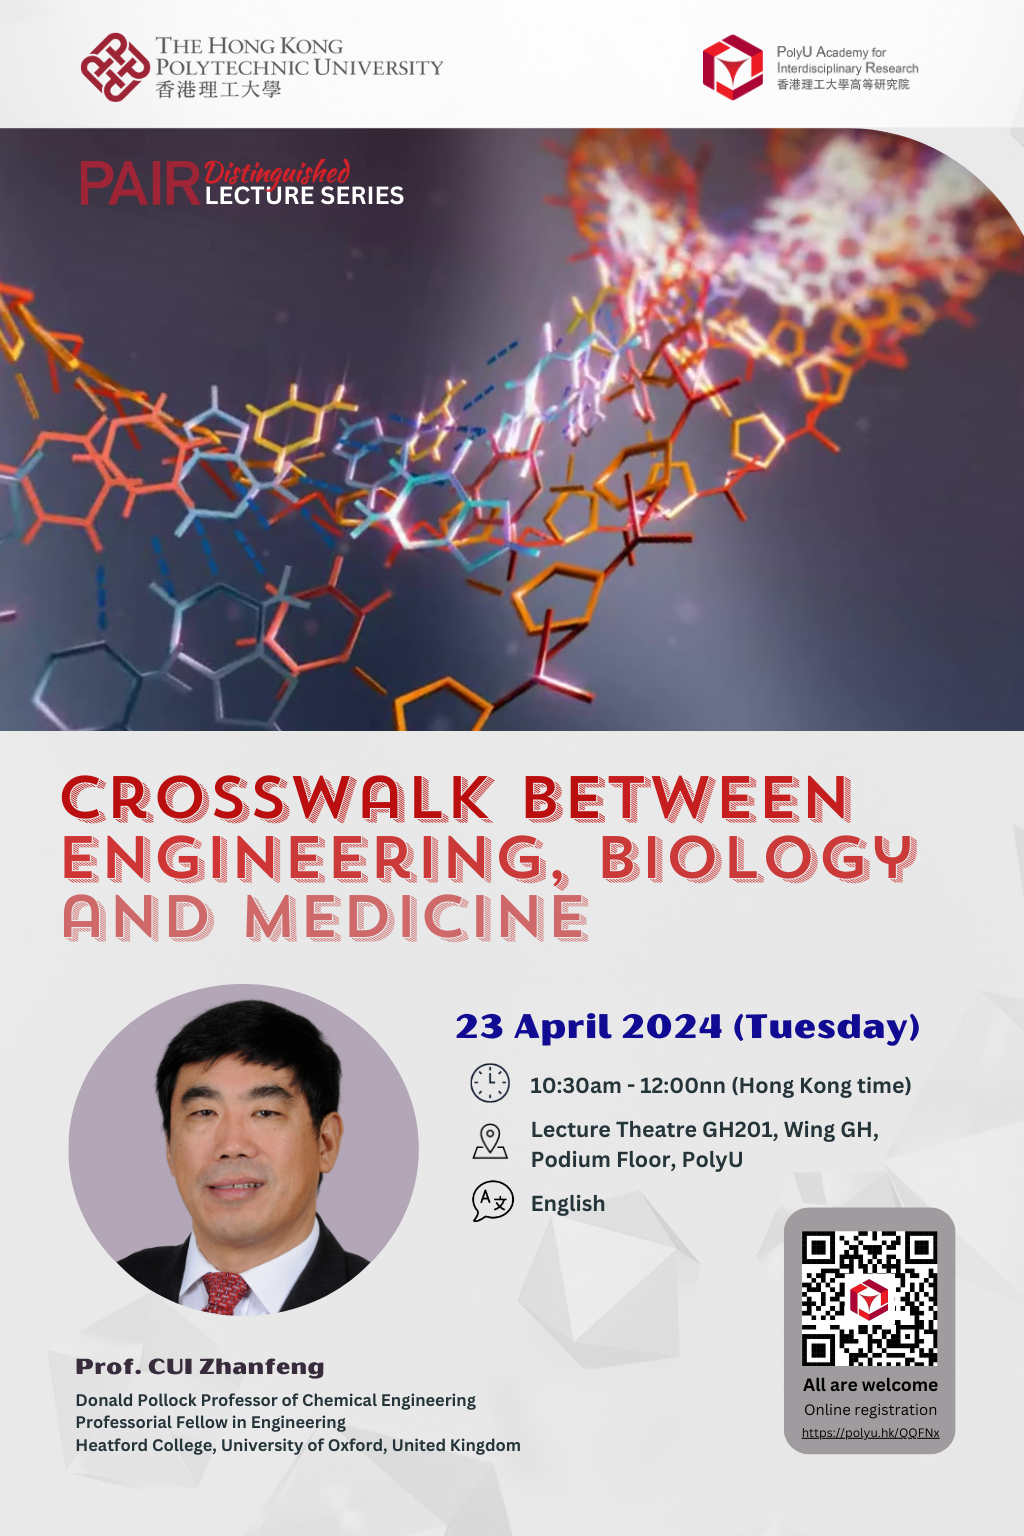 DLS by Prof CUI Zhanfeng on 23 April 20241024 x 1536 pxEN